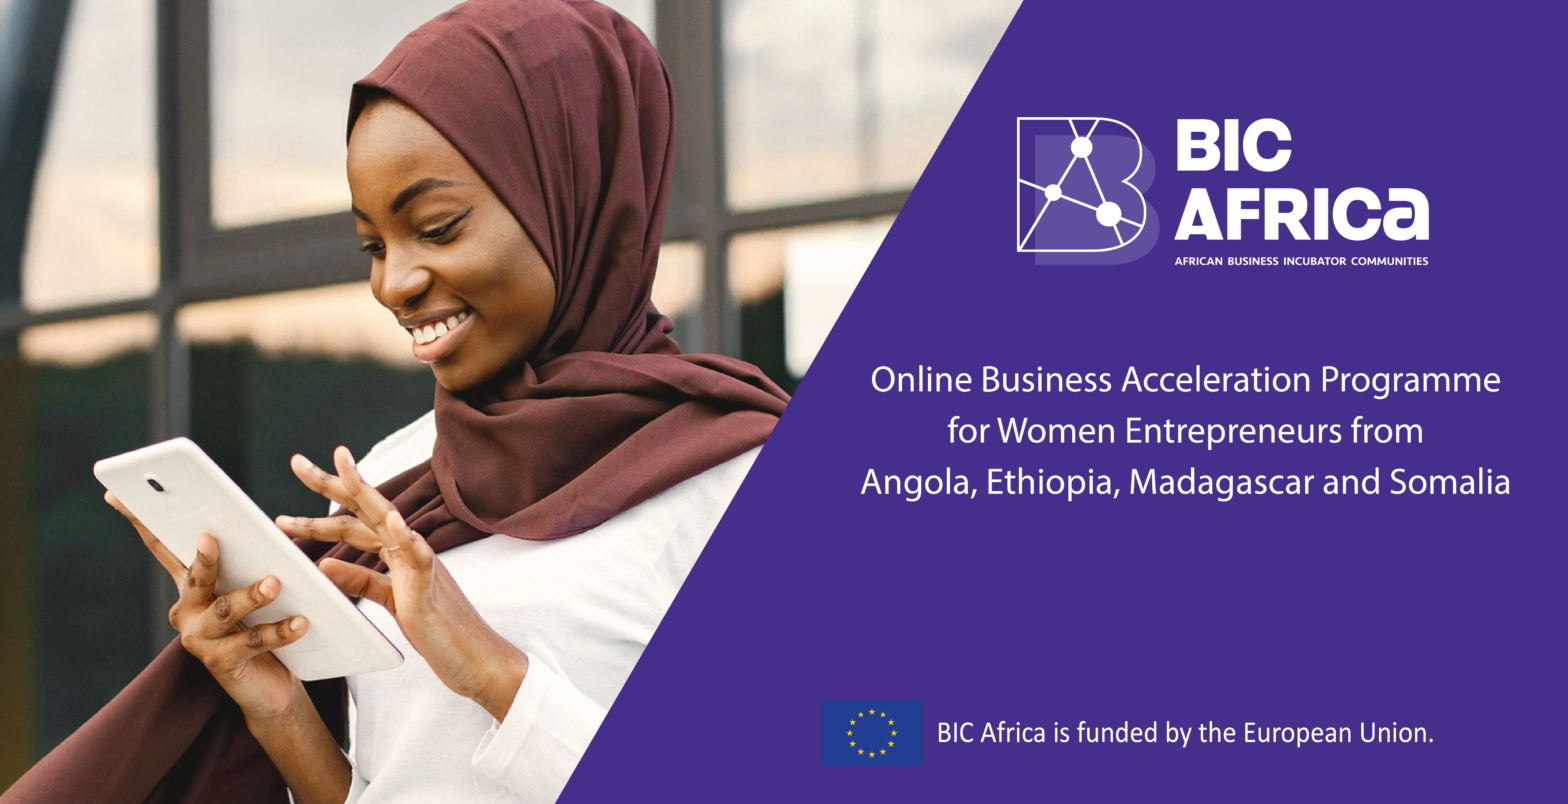 BIC Africa Business Acceleration Programme for Women Entrepreneurs second cohort kicked off